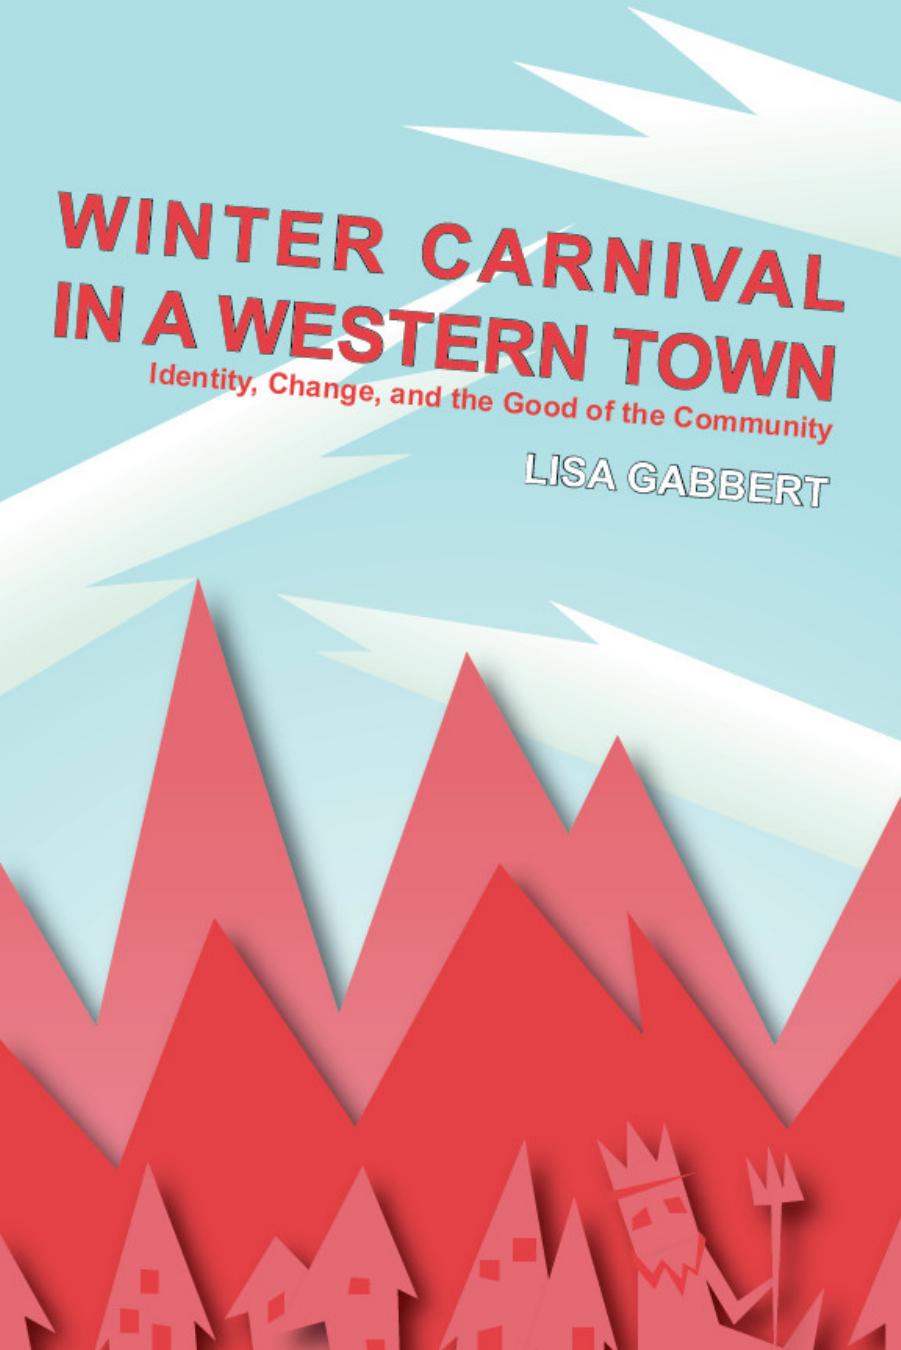 Winter Carnival in a Western Town : Identity, Change and the Good of the Community by Lisa Gabbert